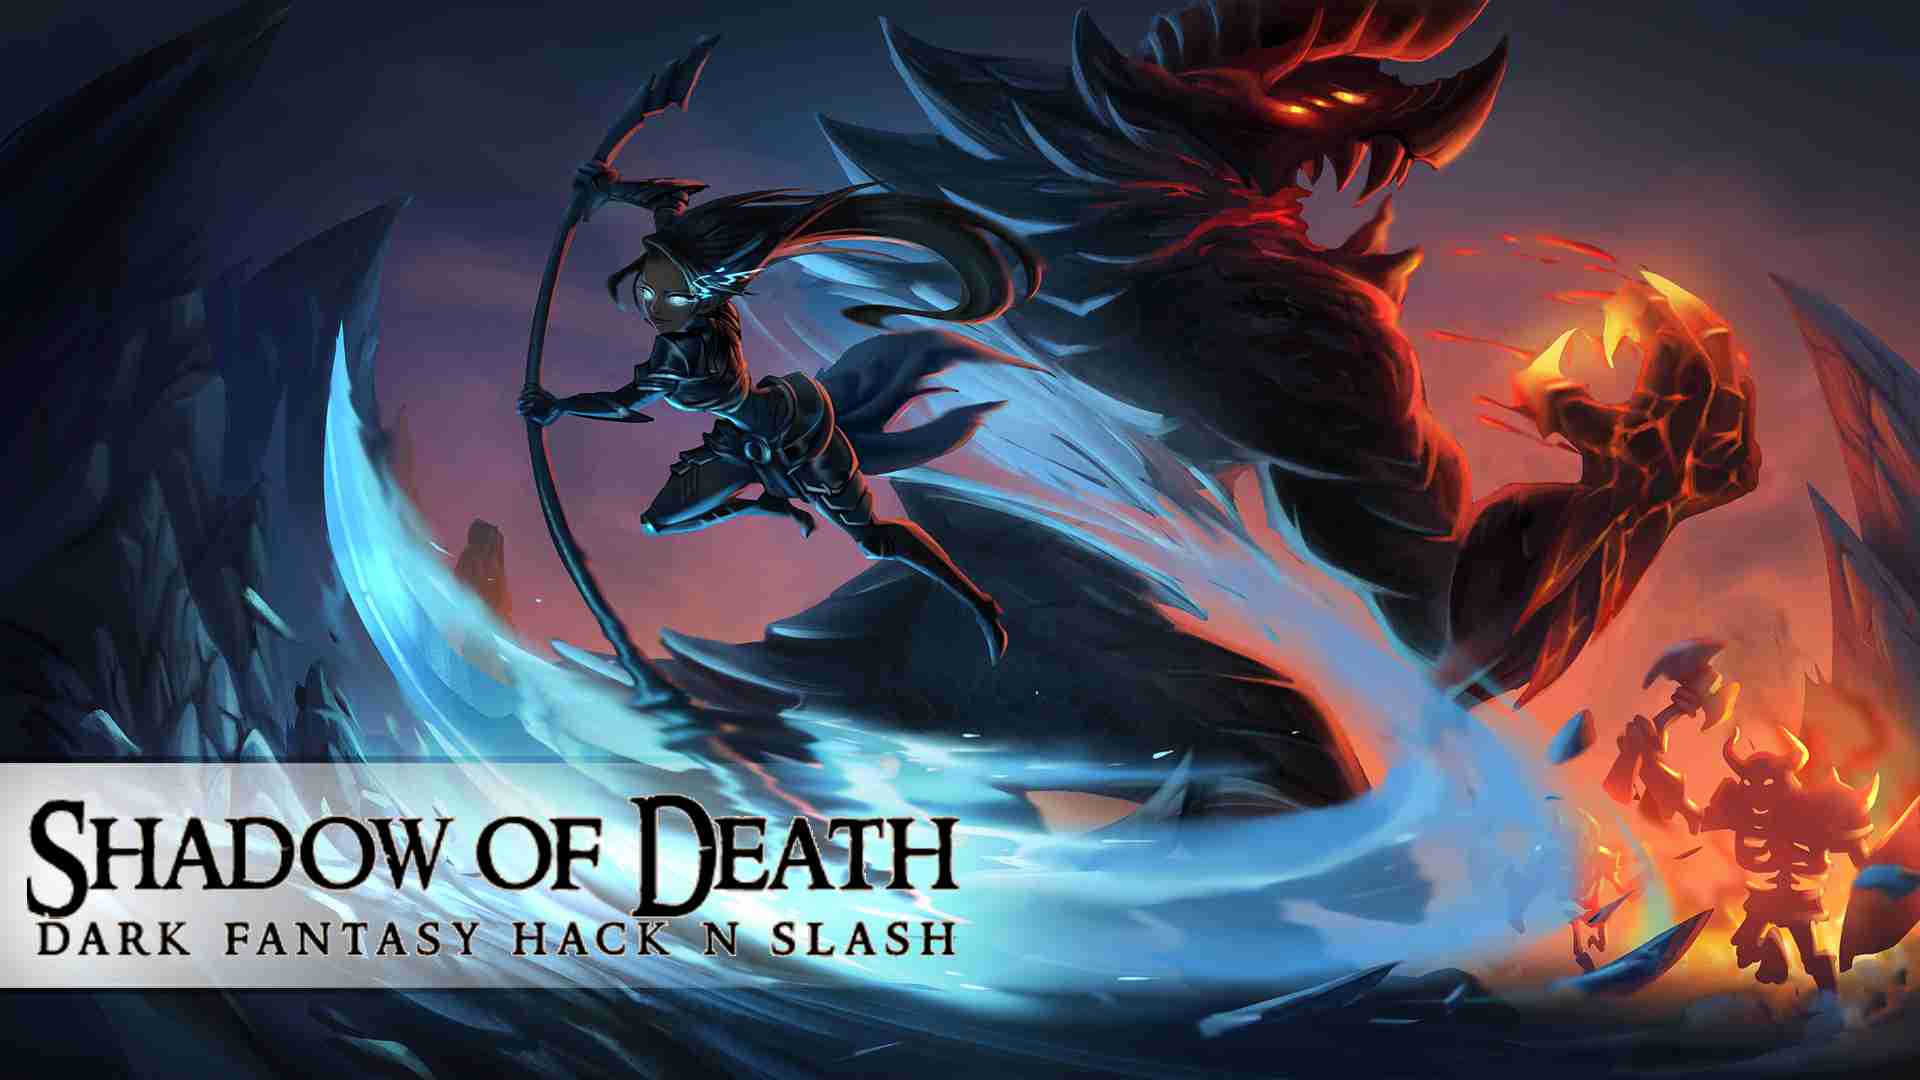 Shadow of Death 1.105.0.0 APK MOD [Menu LMH, Huge Amount Of Money, crystals, max level, free shopping, unlock all characters]